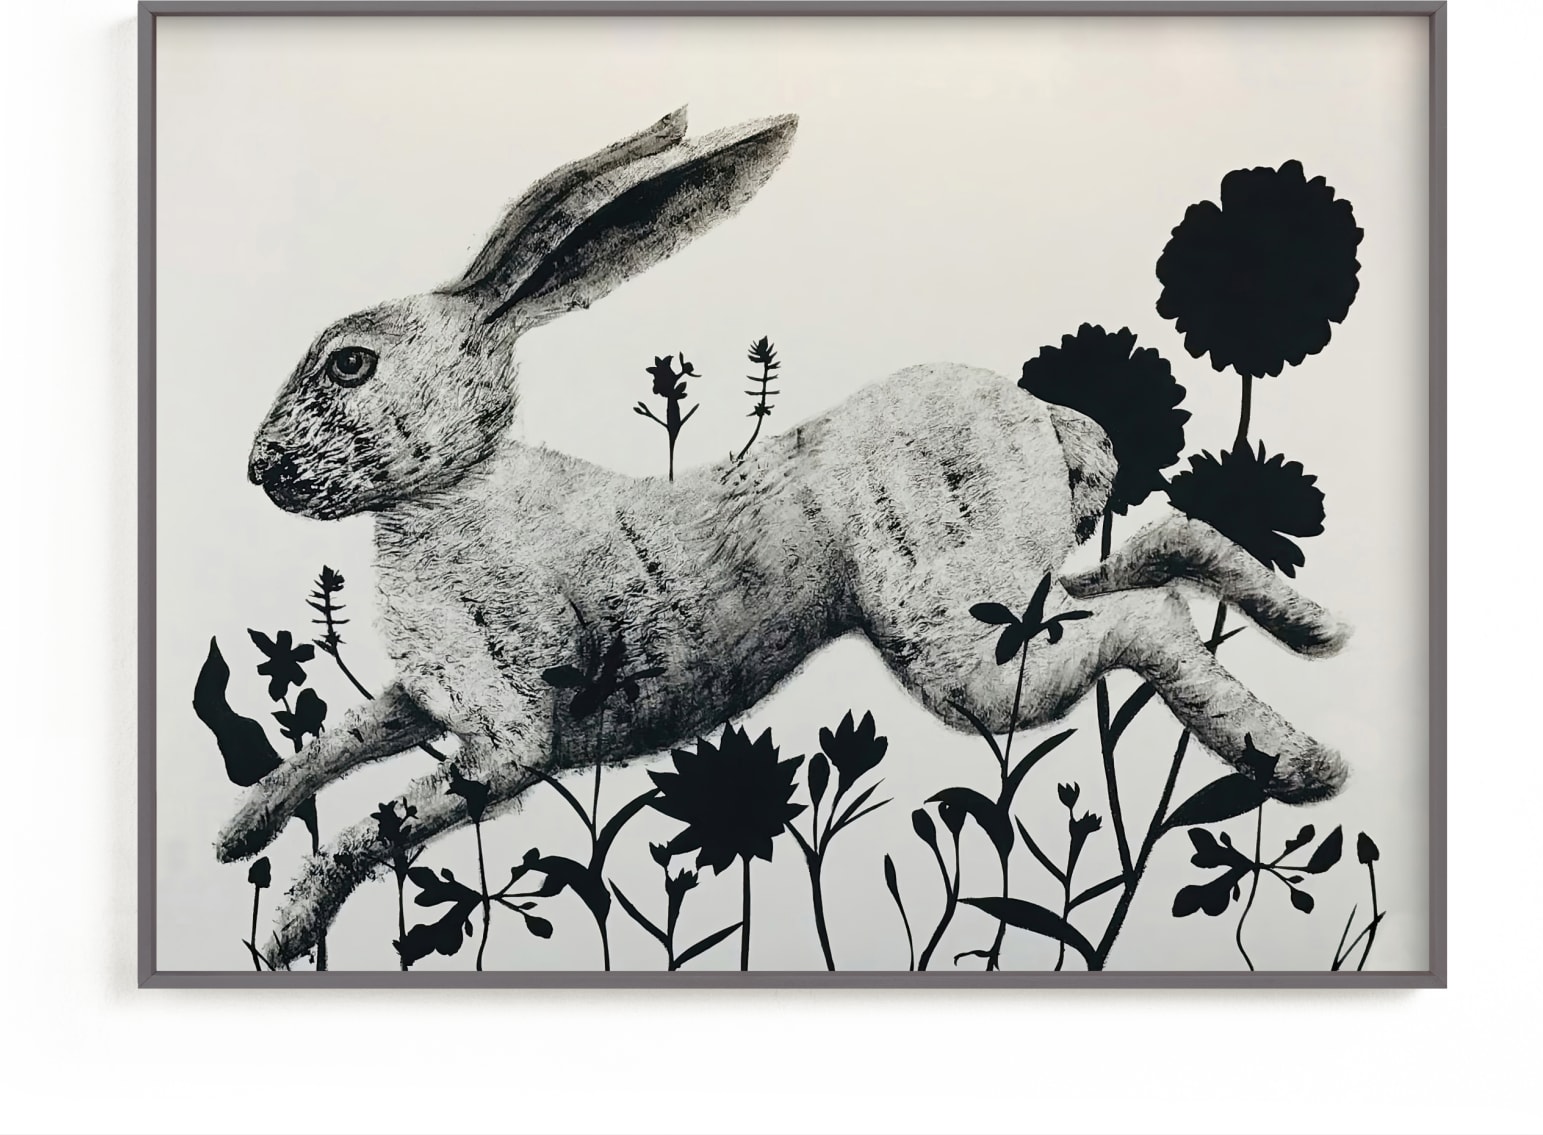 This is a black and white art by Holly Hudson called Leaping Hare.